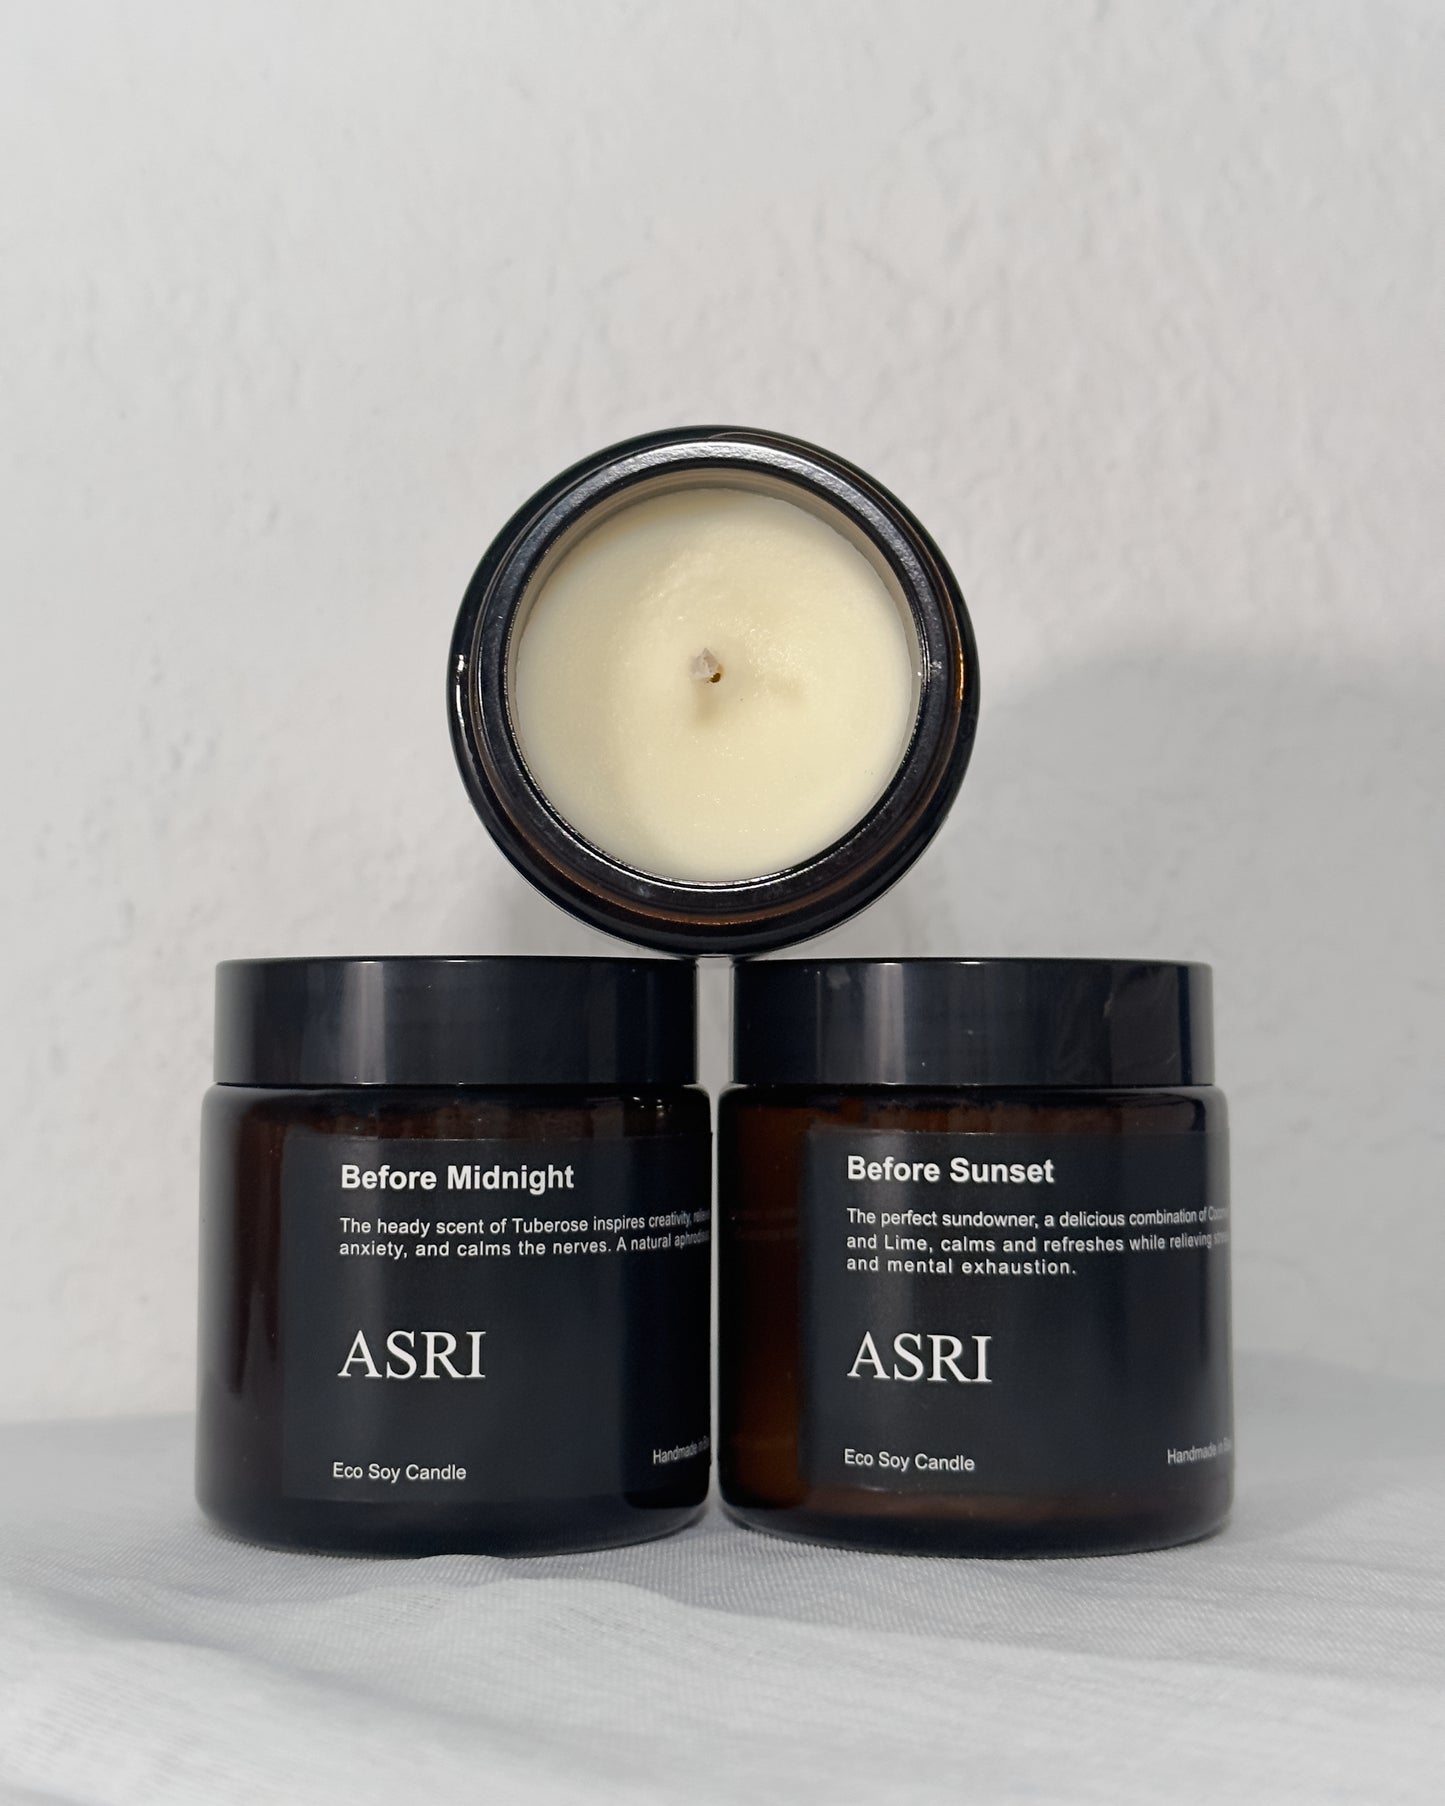 Asri Eco Soy Candle - Before Sunset